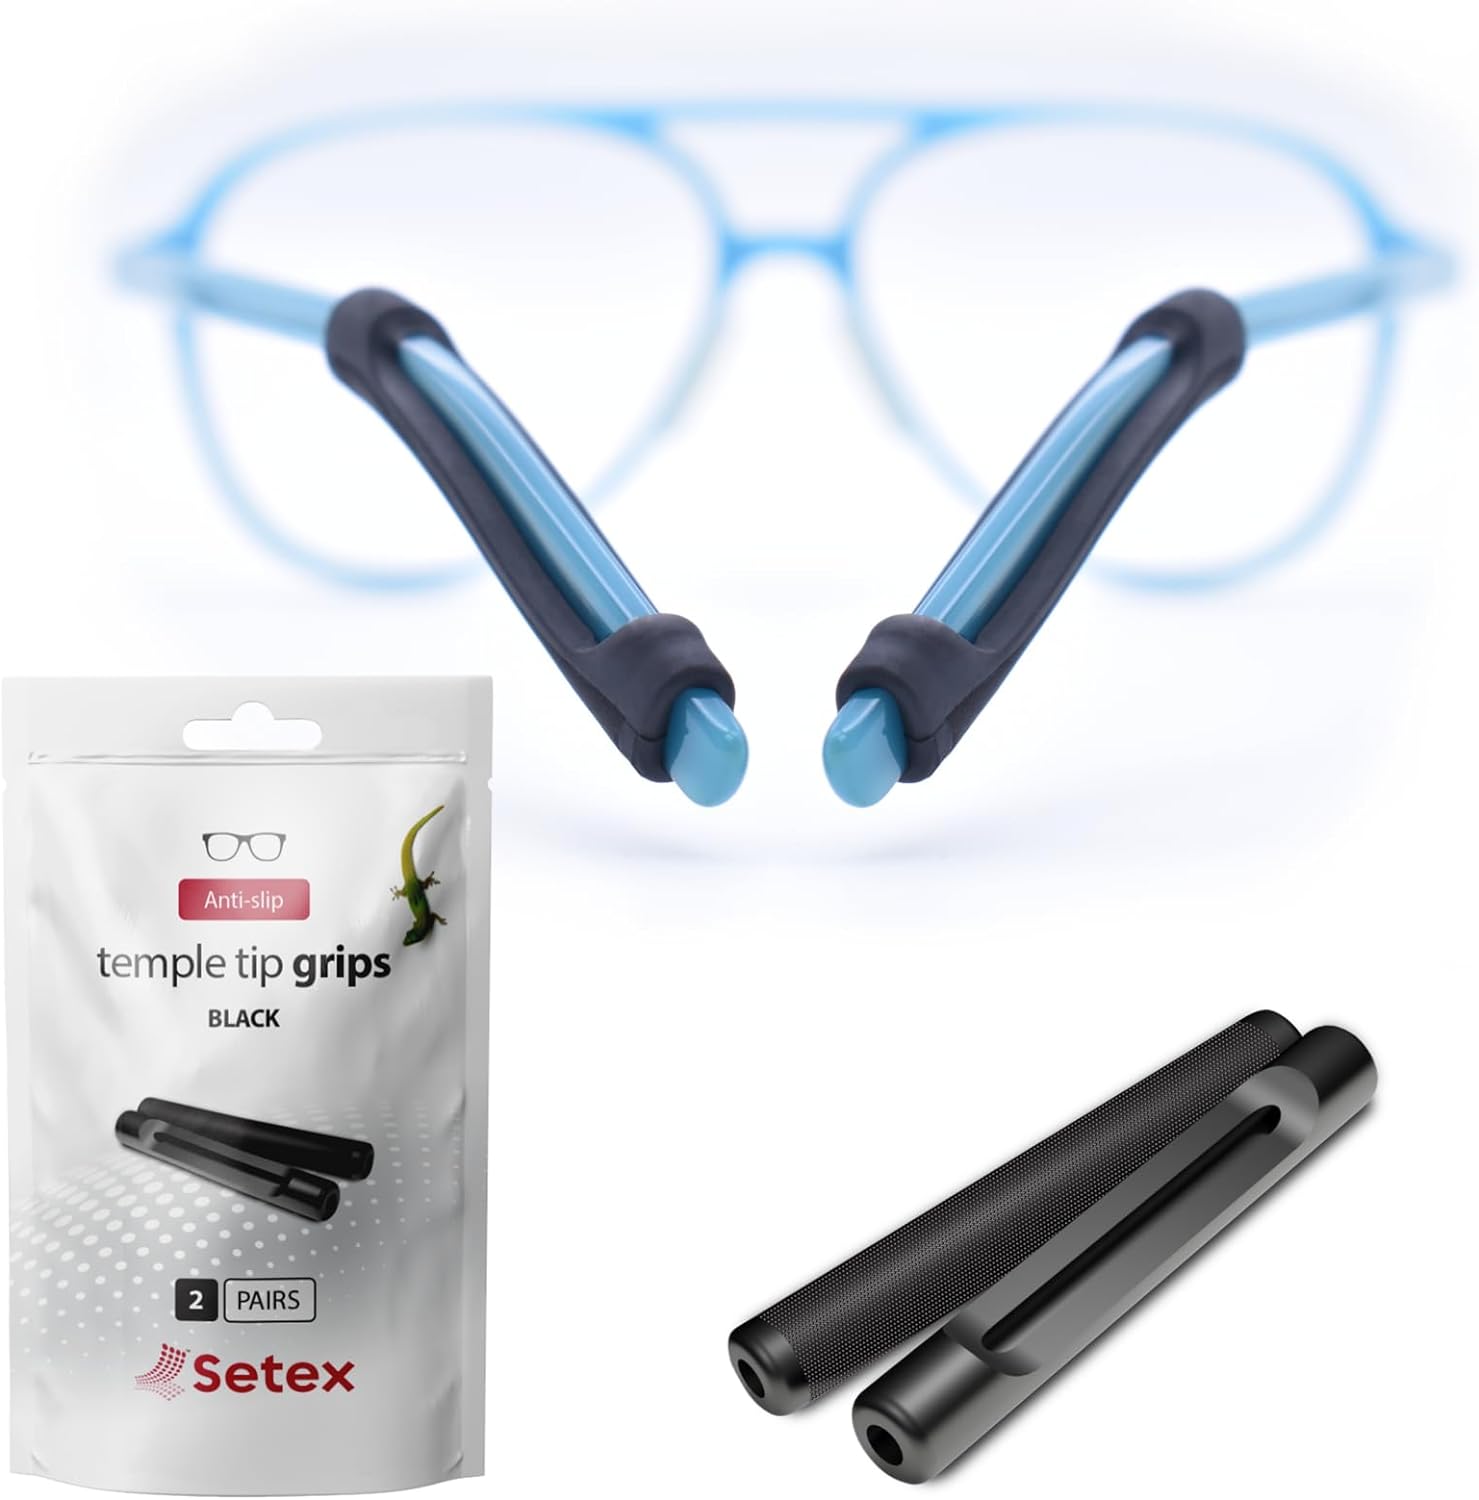 Setex Gecko Grip Temple Tip Grips for Glasses